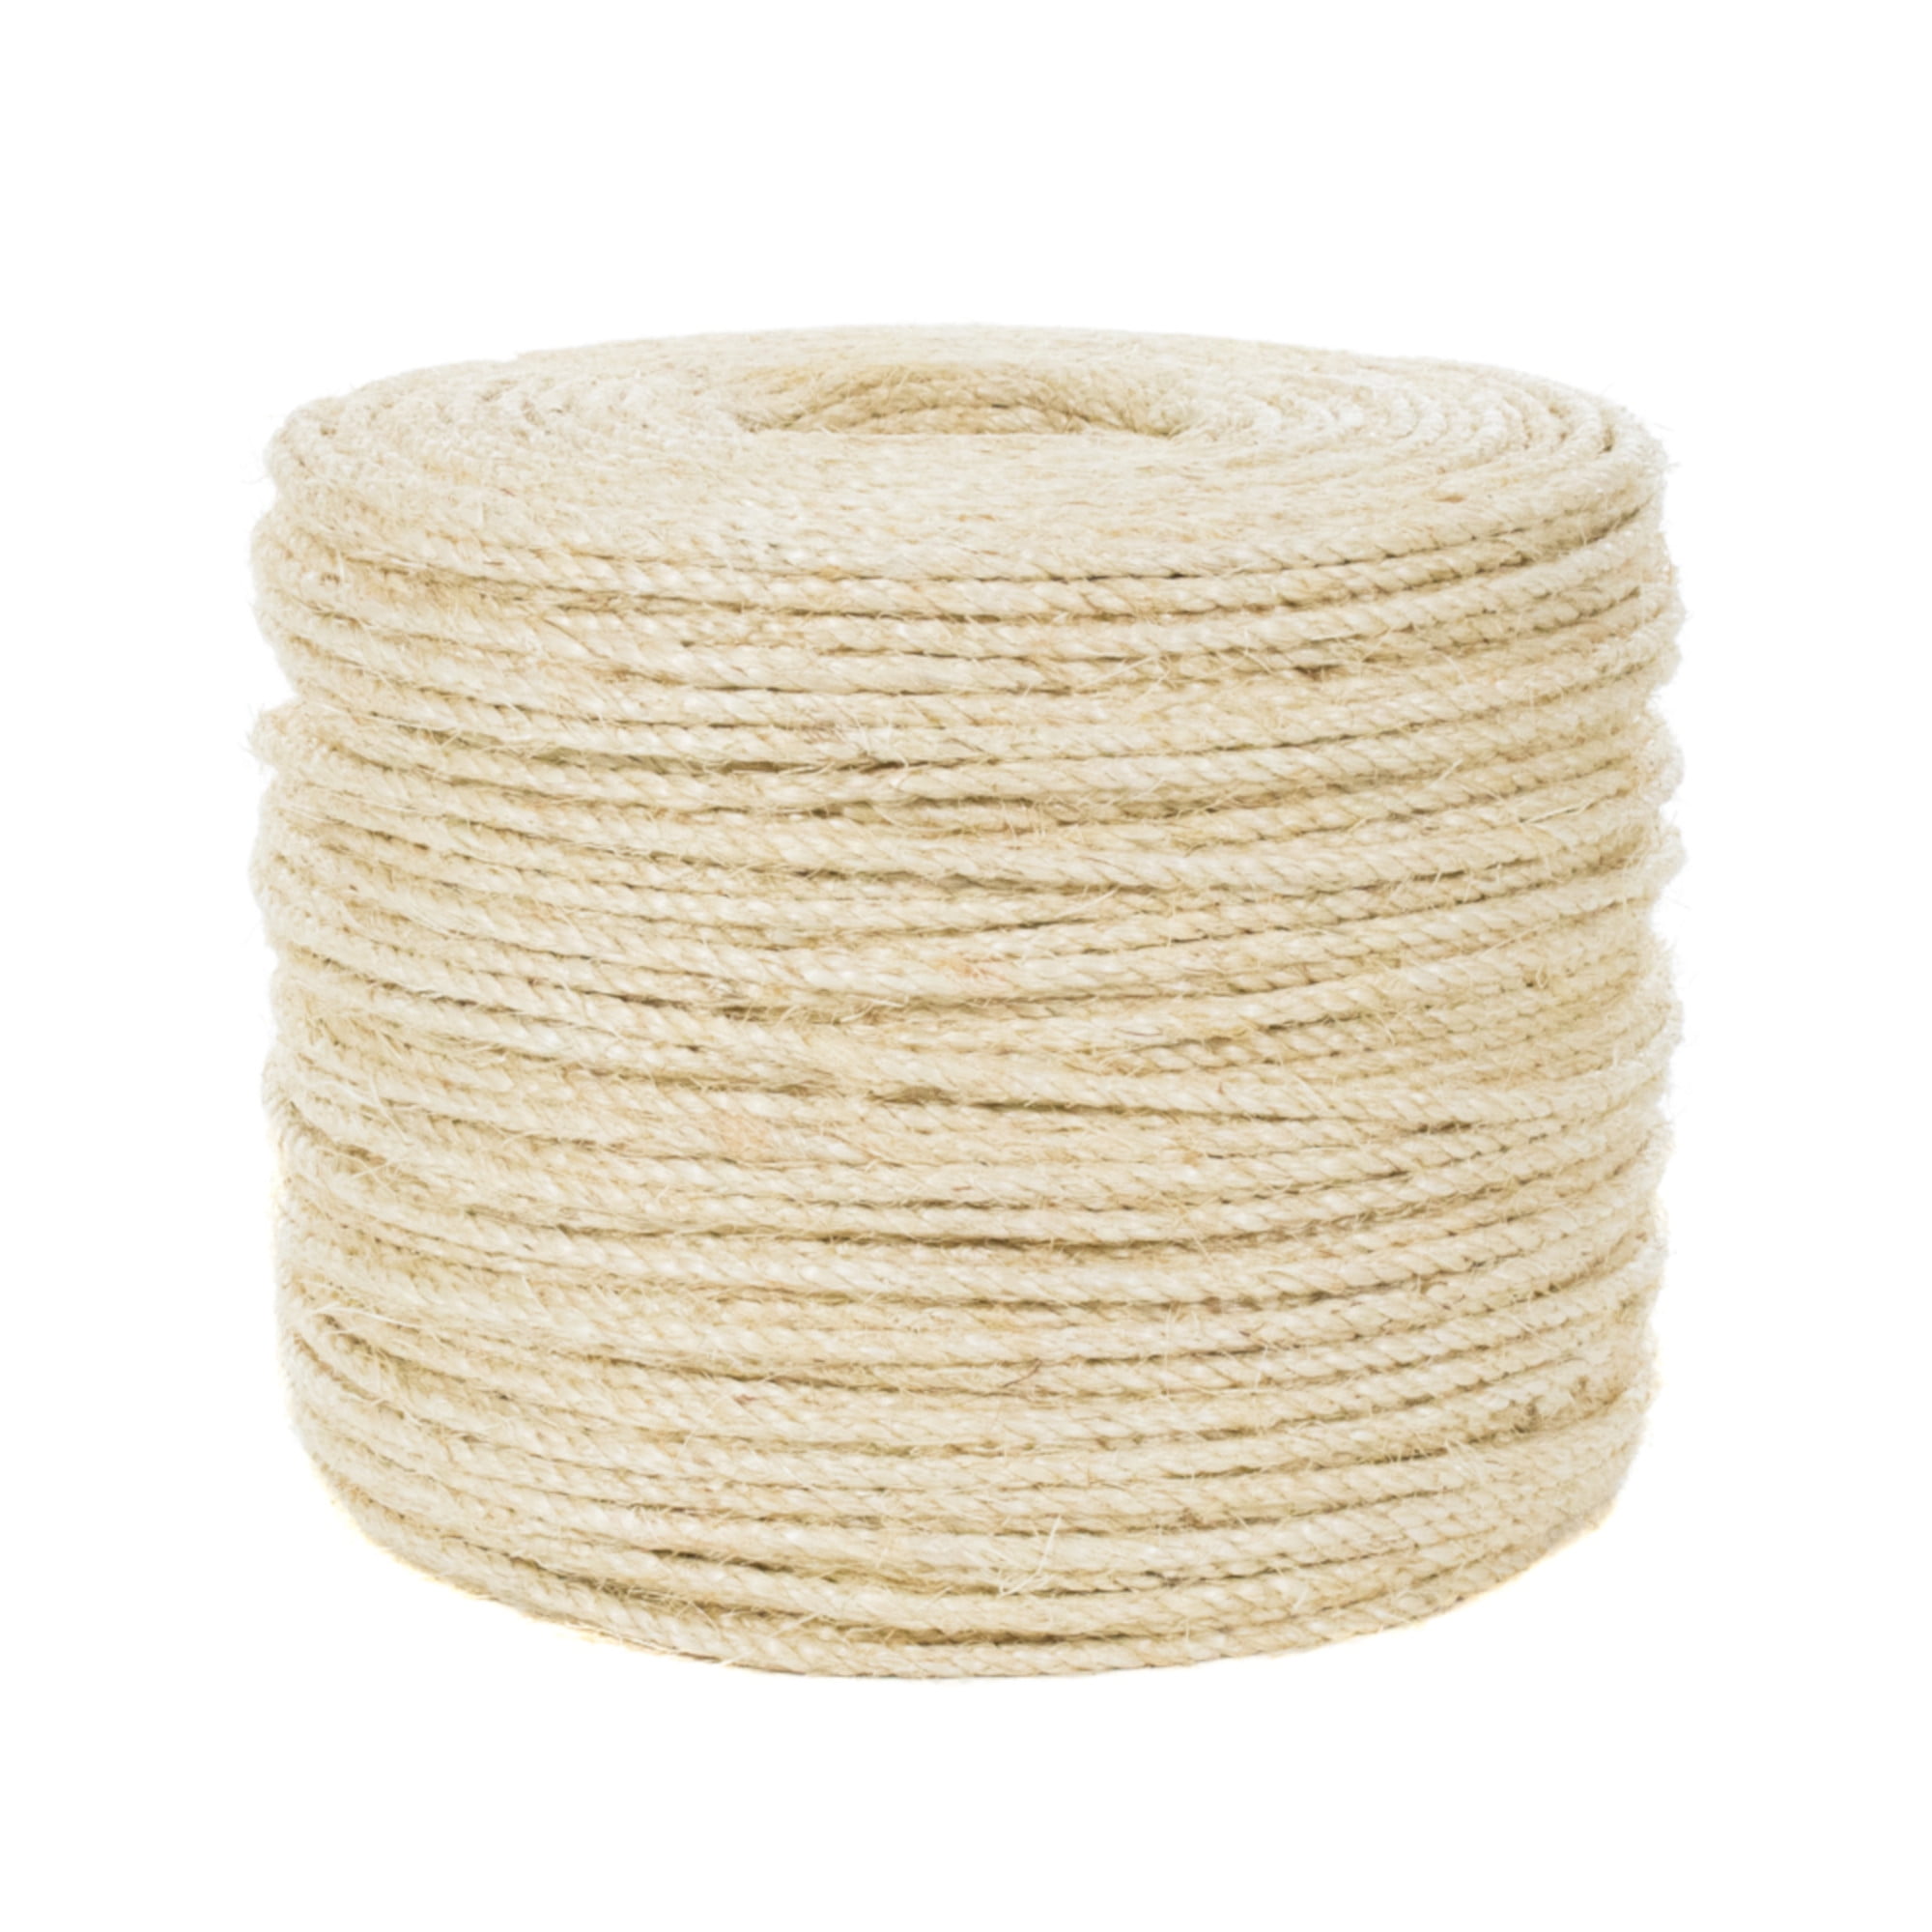 Golberg Twisted Sisal Rope Available in 1/4, 5/16, 3/8, 1/2, 3/4